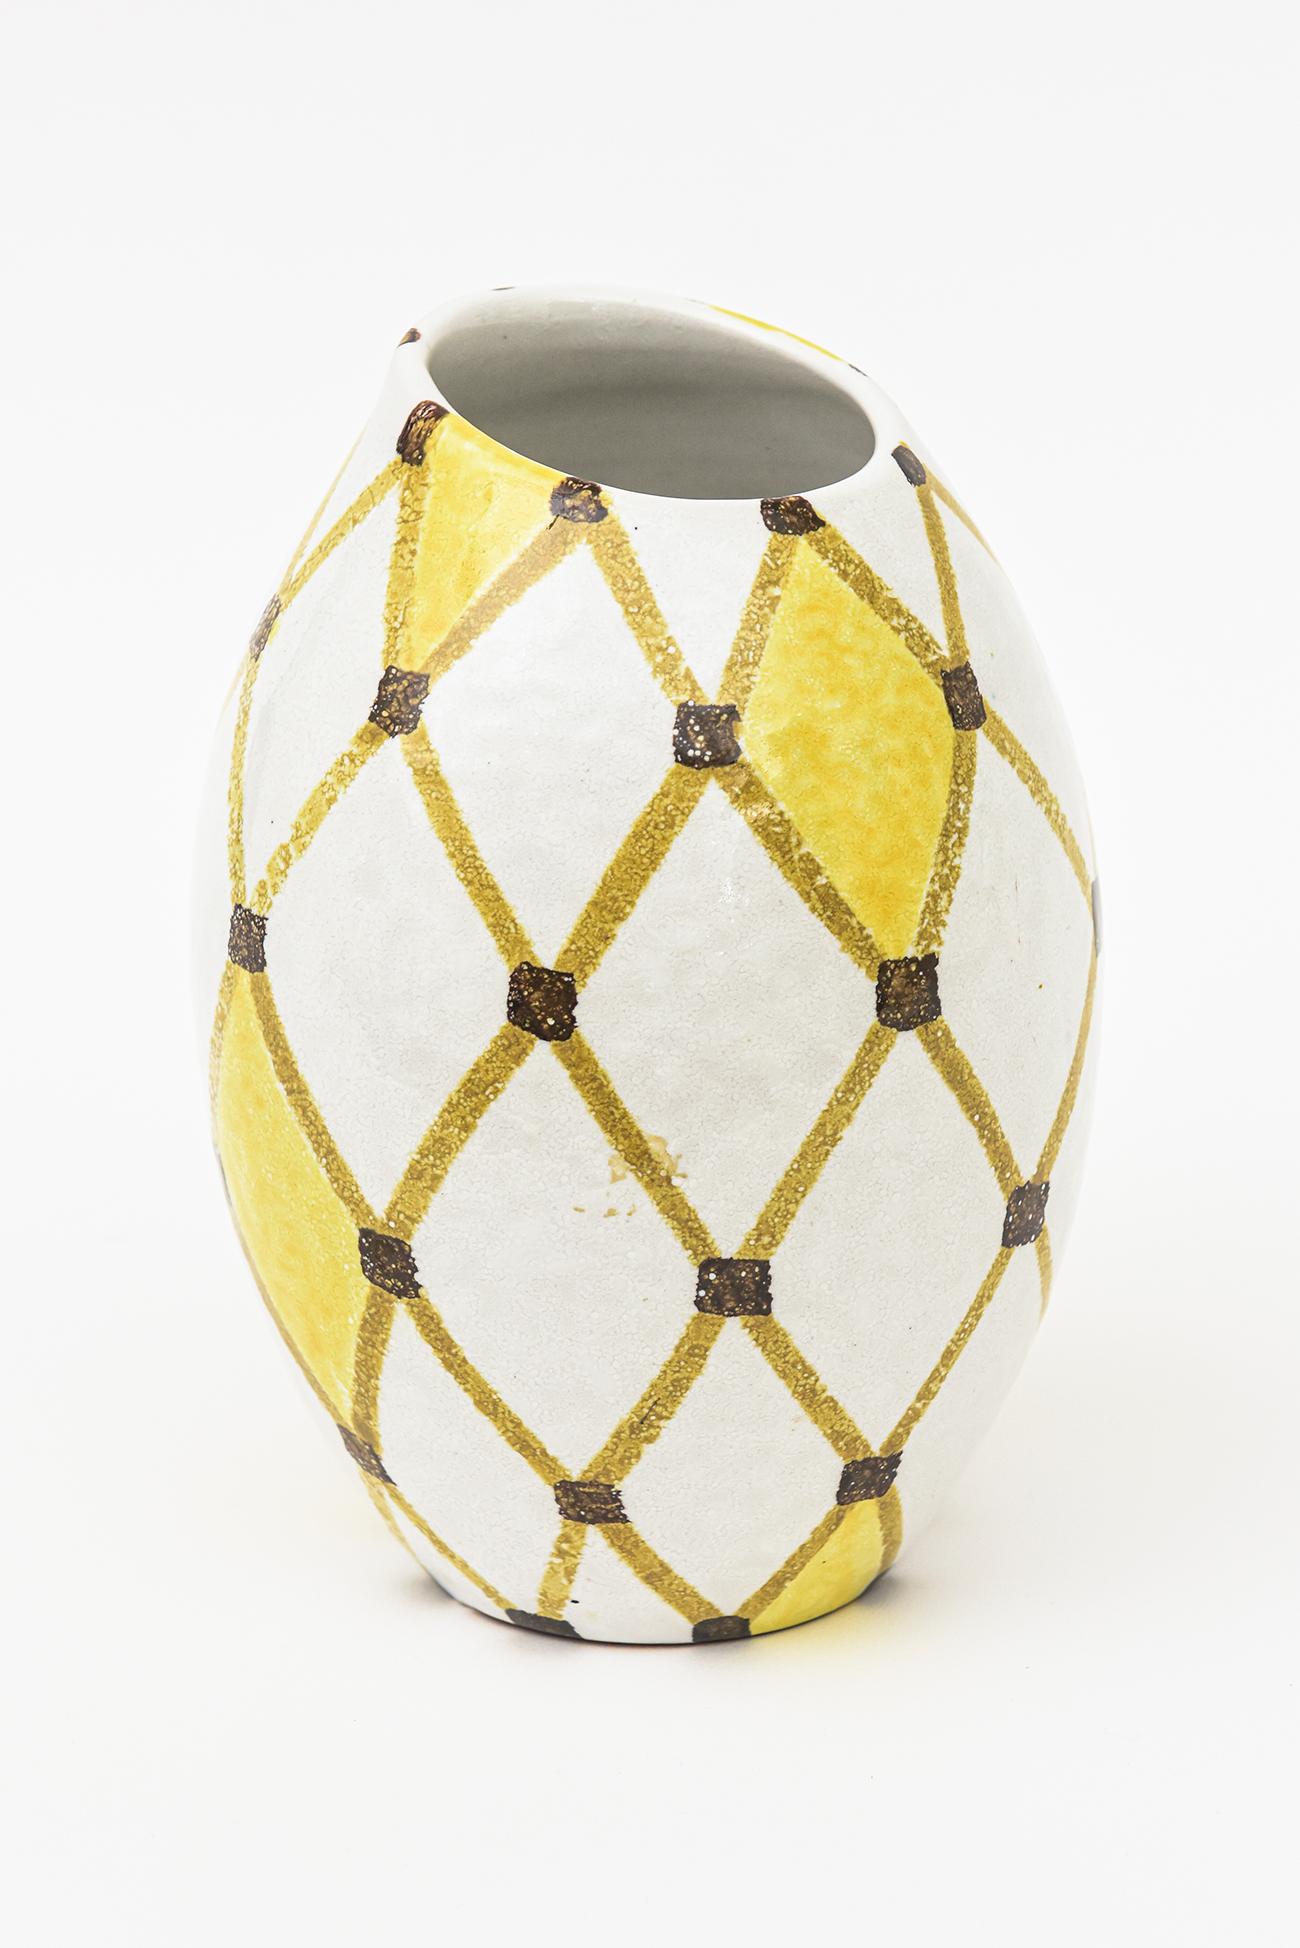 This unique and unusual vintage painted ceramic Italian Bitossi vase or vessel or object is marked with numbers on the bottom and reads V412/016 and a signature not legible. The design is diamond patterned and the colors are yellow, white, brown